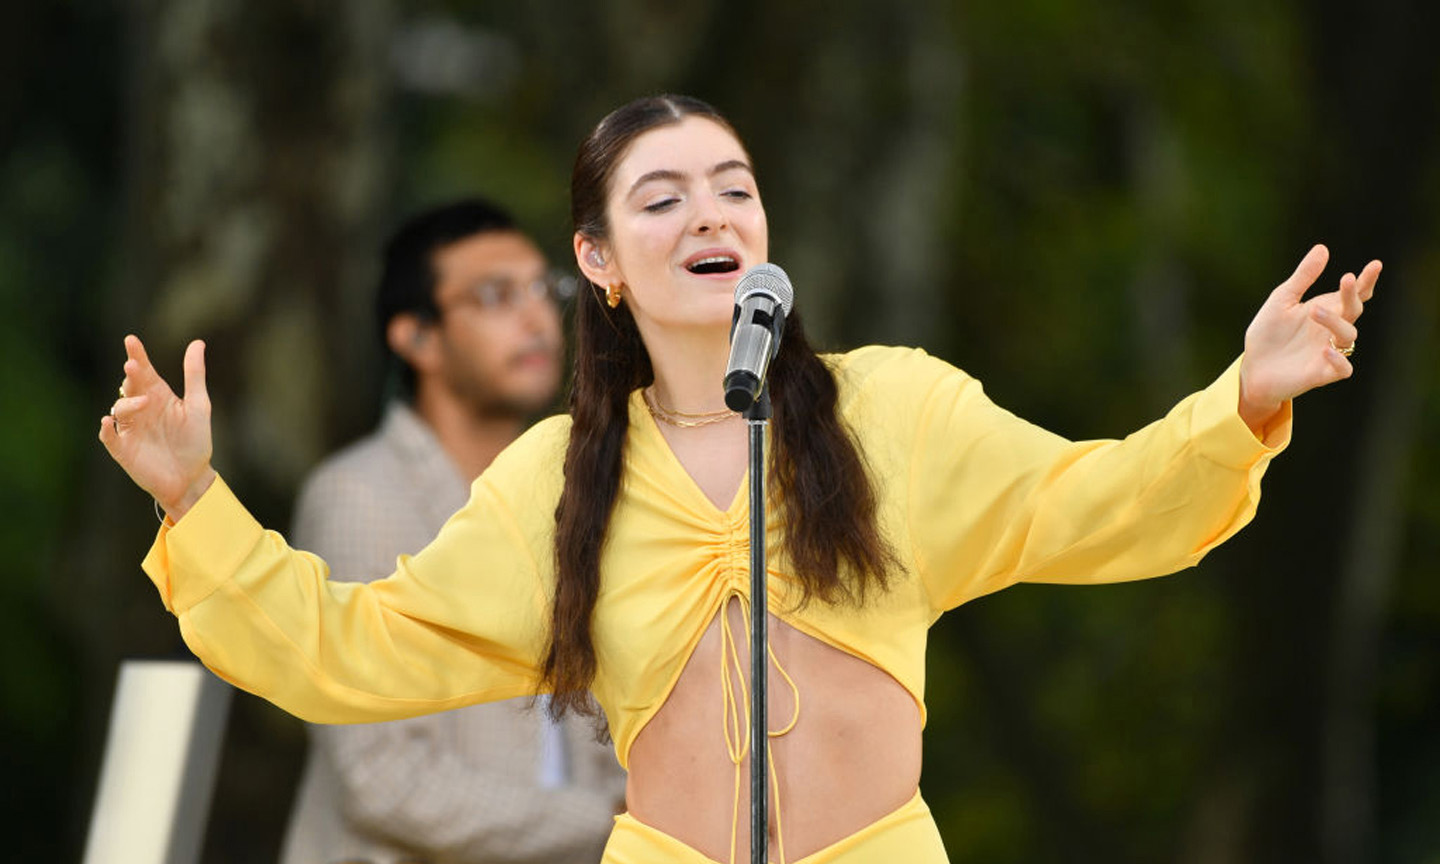 Apple Music Launches ‘100 Best Albums Of All Time’ With Titles By Lorde & More